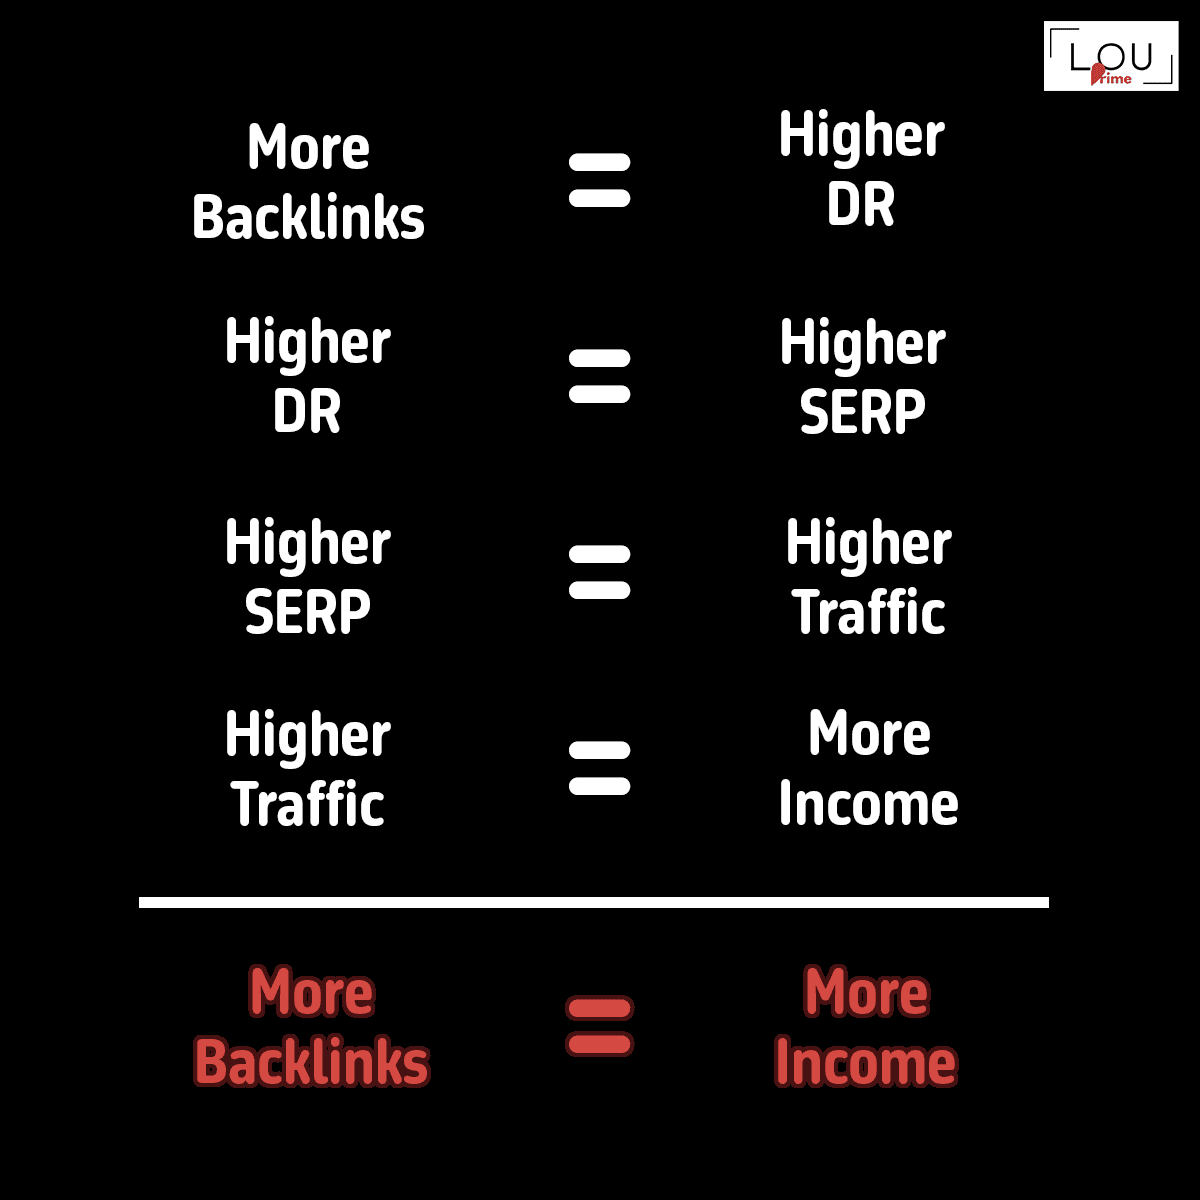 Make money blogging by leveraging backlinks to your content. You will boost your DR, which increases your SERPs, leading to more traffic, which will generate you more money.